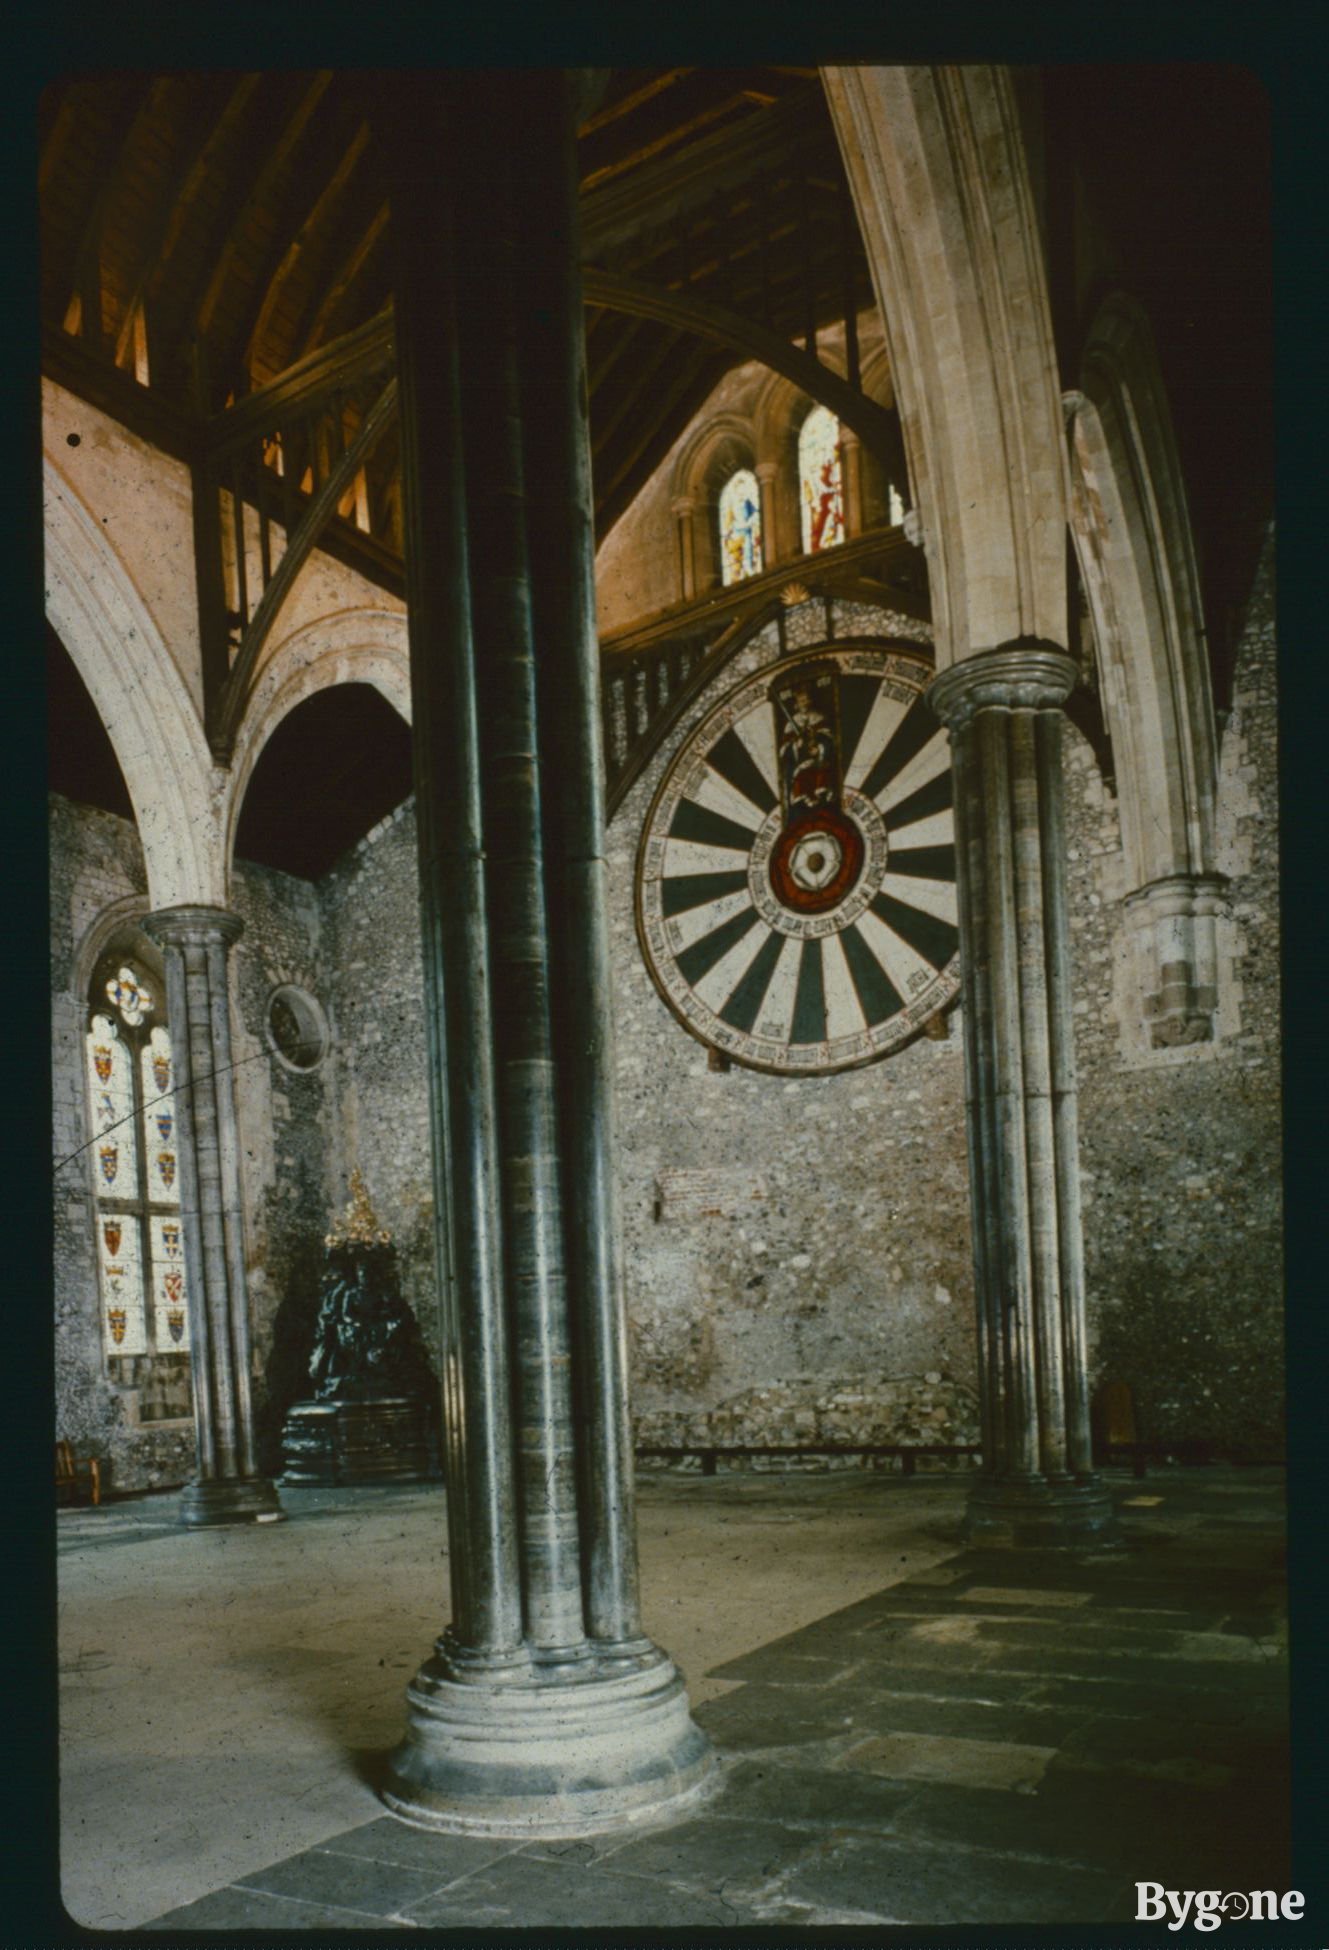 A section of a castle’s great hall. Taken from behind a stone pillar arch, looking up at a black and white round table that has been mounted into the centre of a stone wall. In the table’s centre is depicted a Tudor Rose; a double rose with white petals for the inner flower and red for the larger outer rose. Above the rose is depicted a seated King Arthur holding an upright sword.